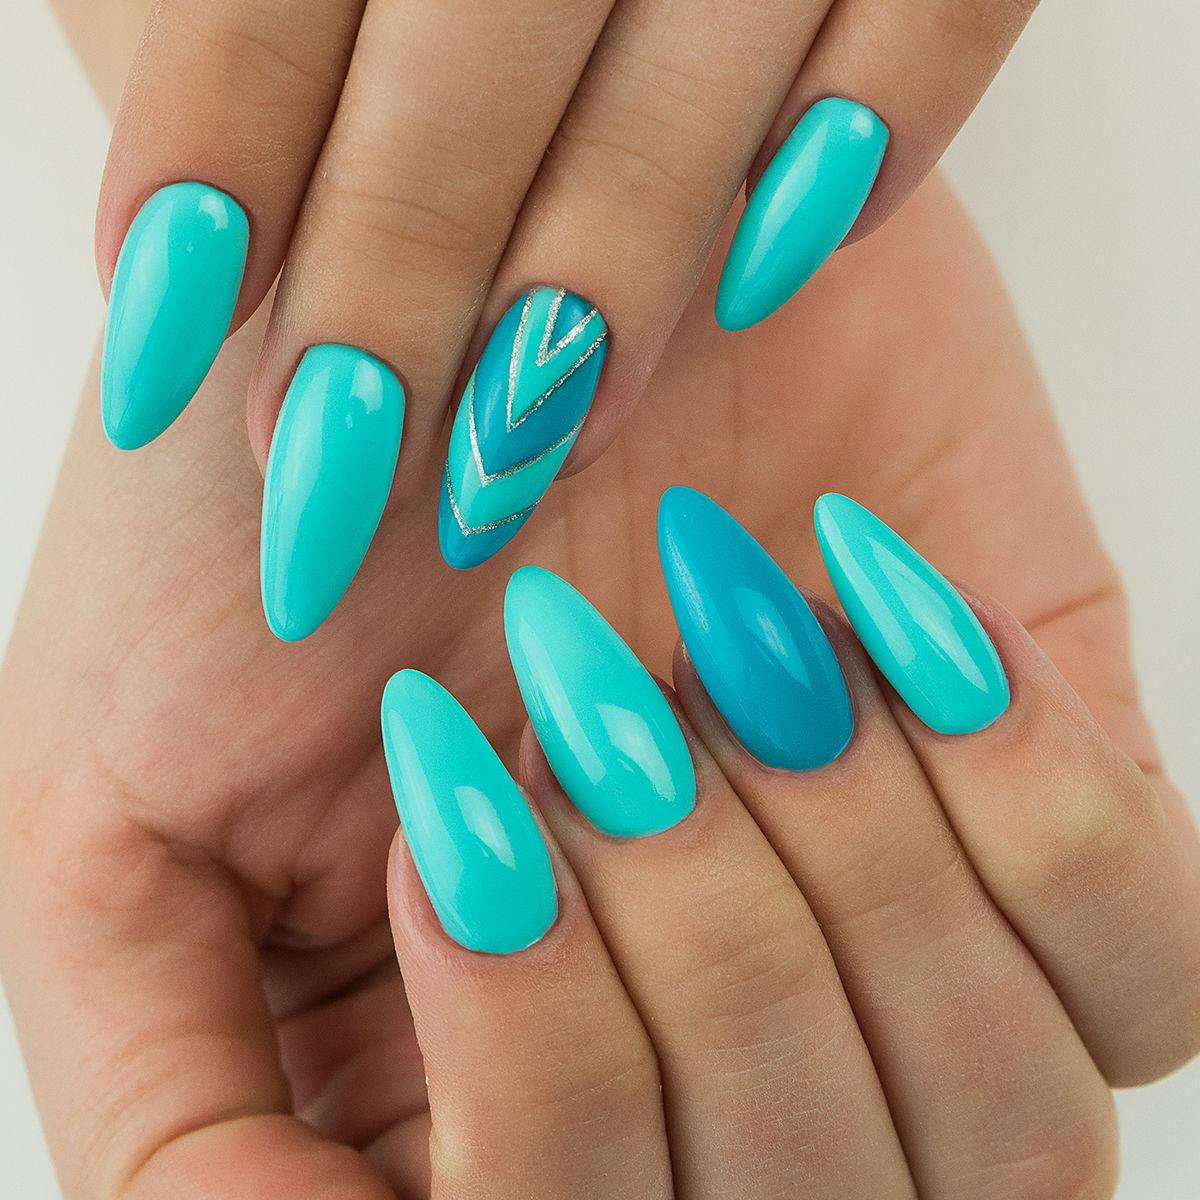 Turquoise 70+ Most Popular Gel Nail Colors - 30